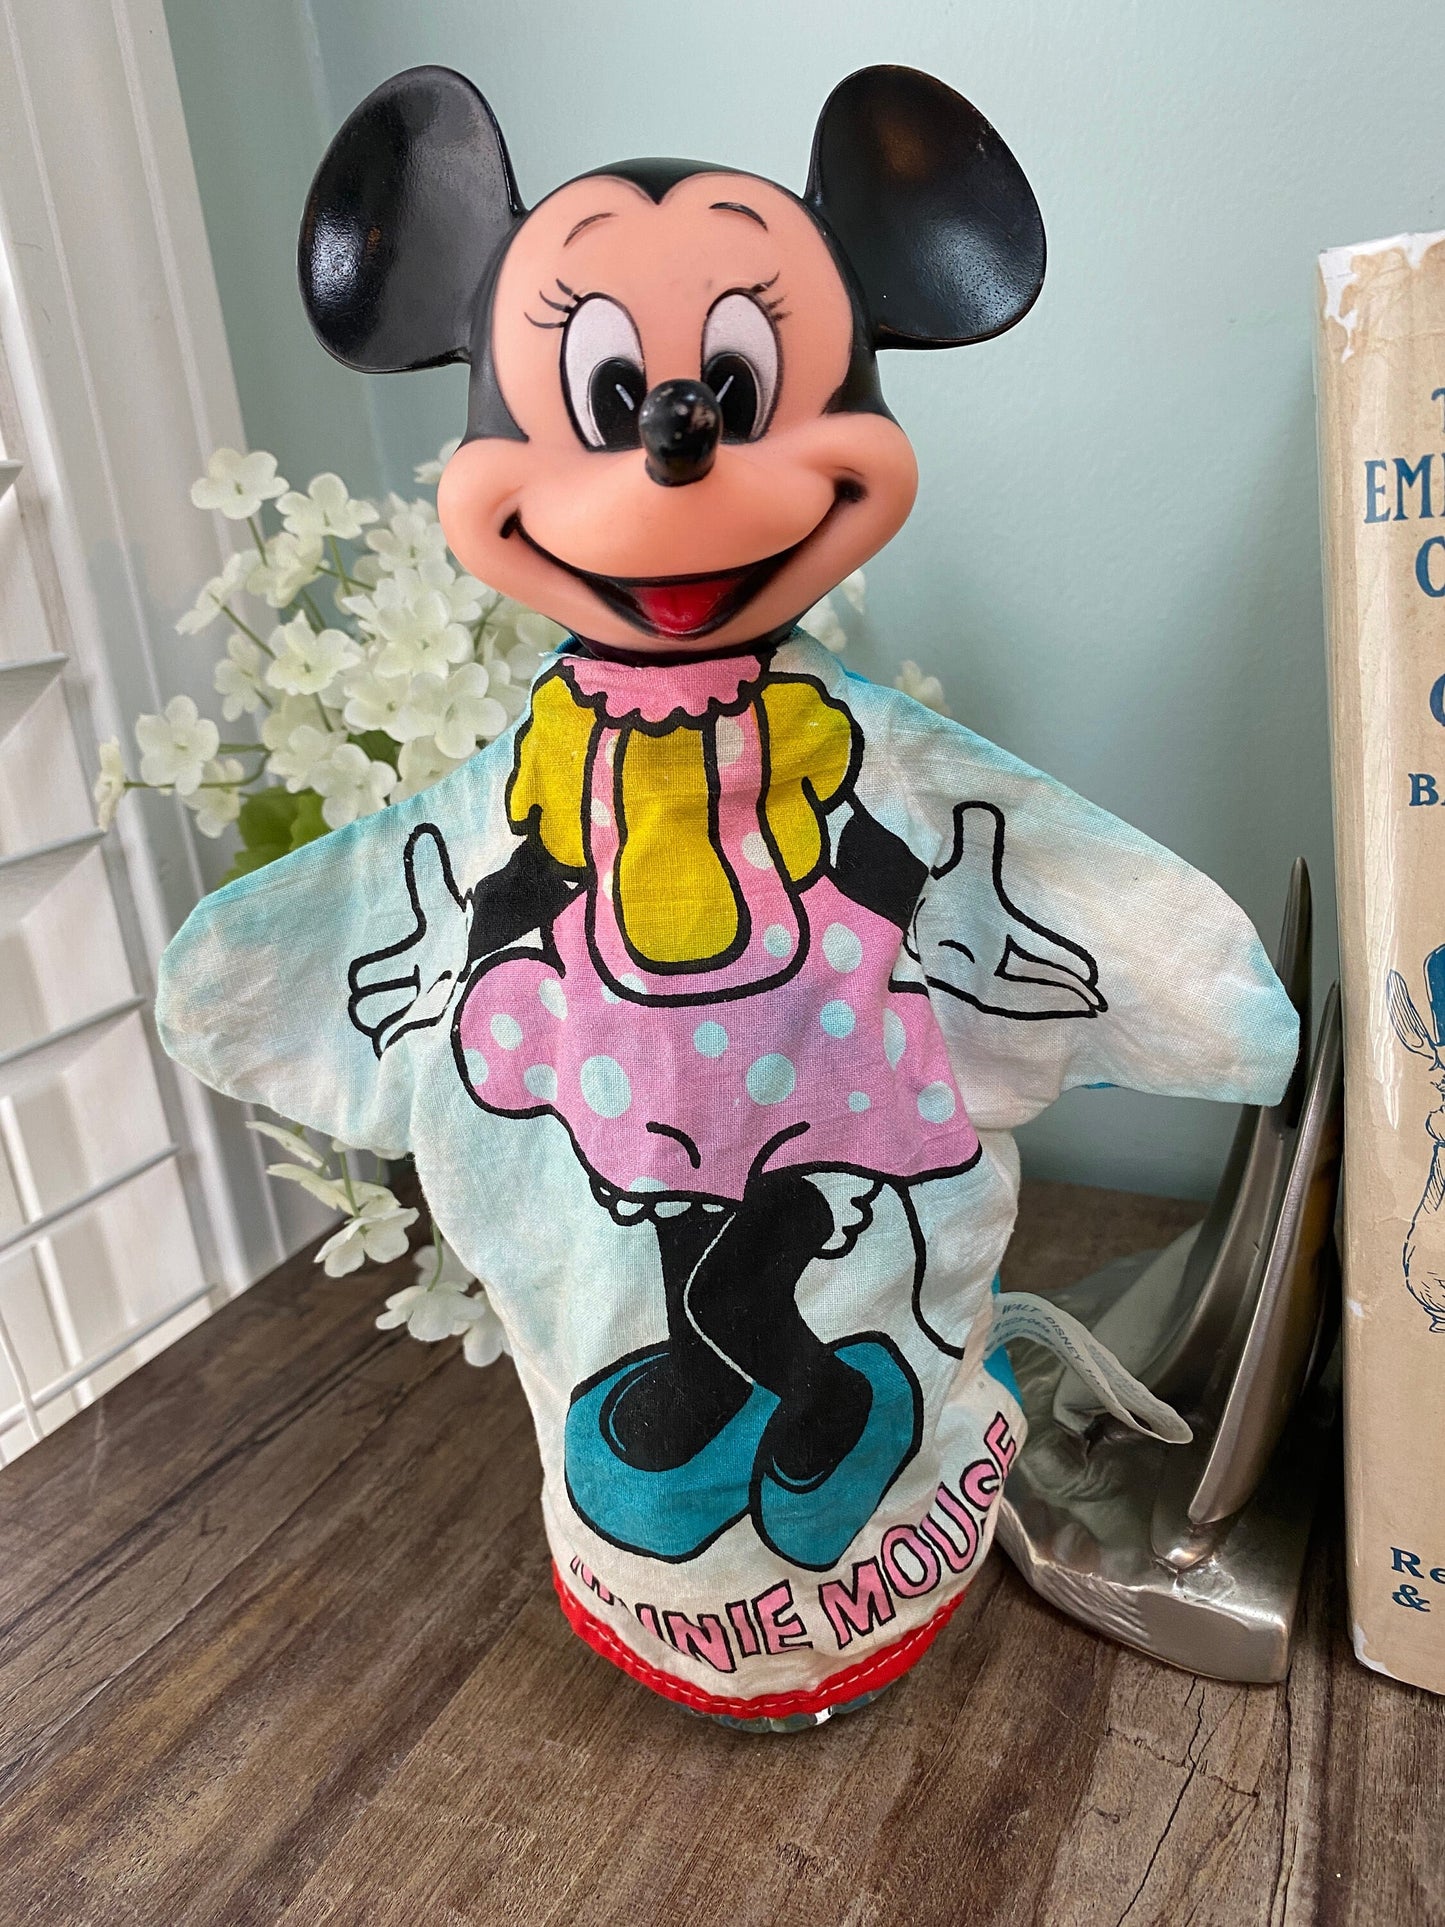 Vintage 1950s Minnie Mouse Hand Puppet